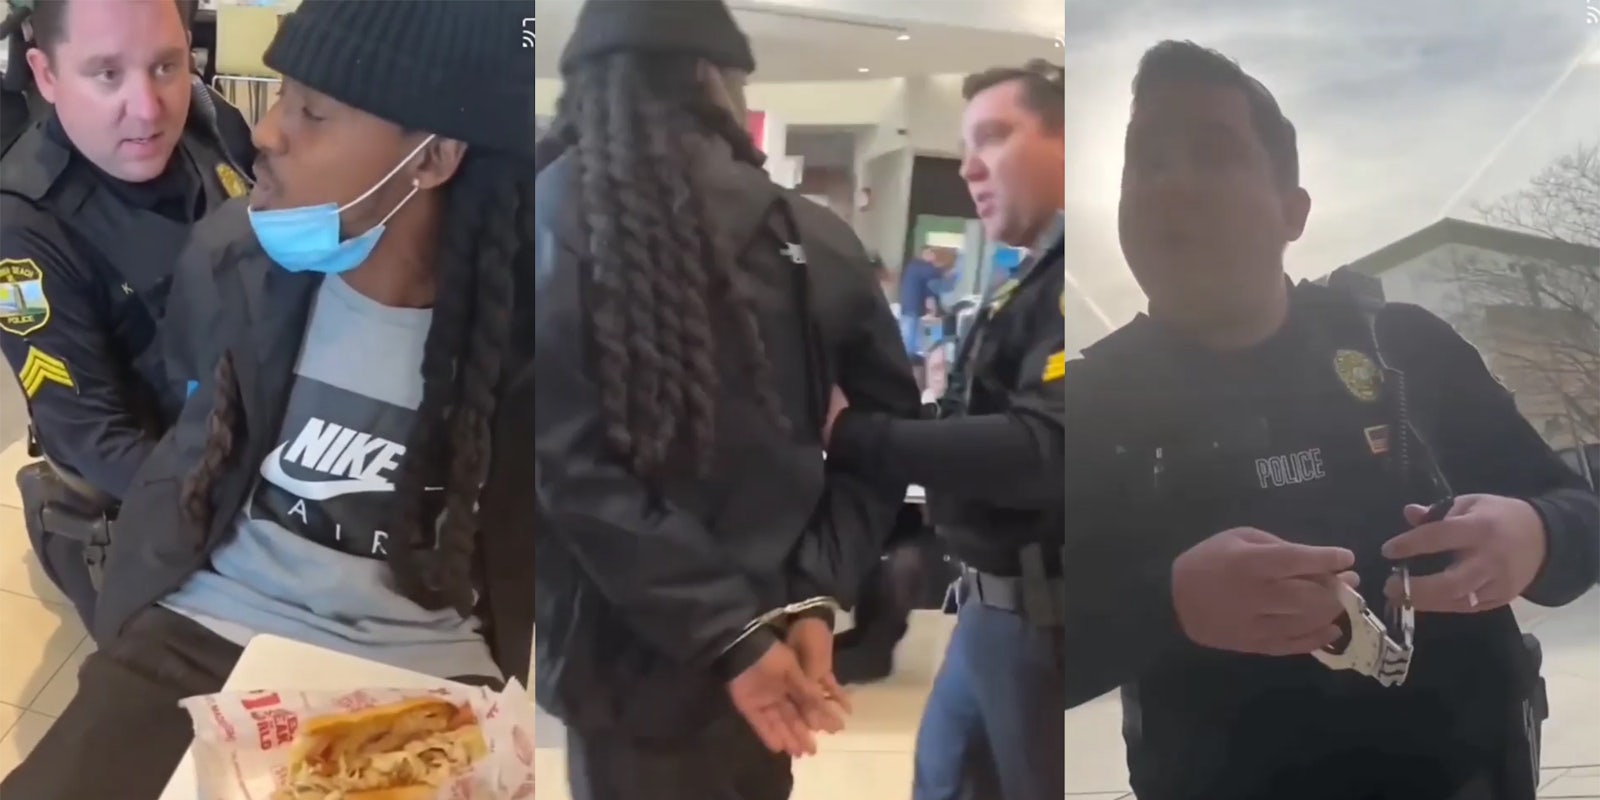 cop handcuffs Black man while eating lunch with his family at a mall, leads him outside, then removes the cuffs